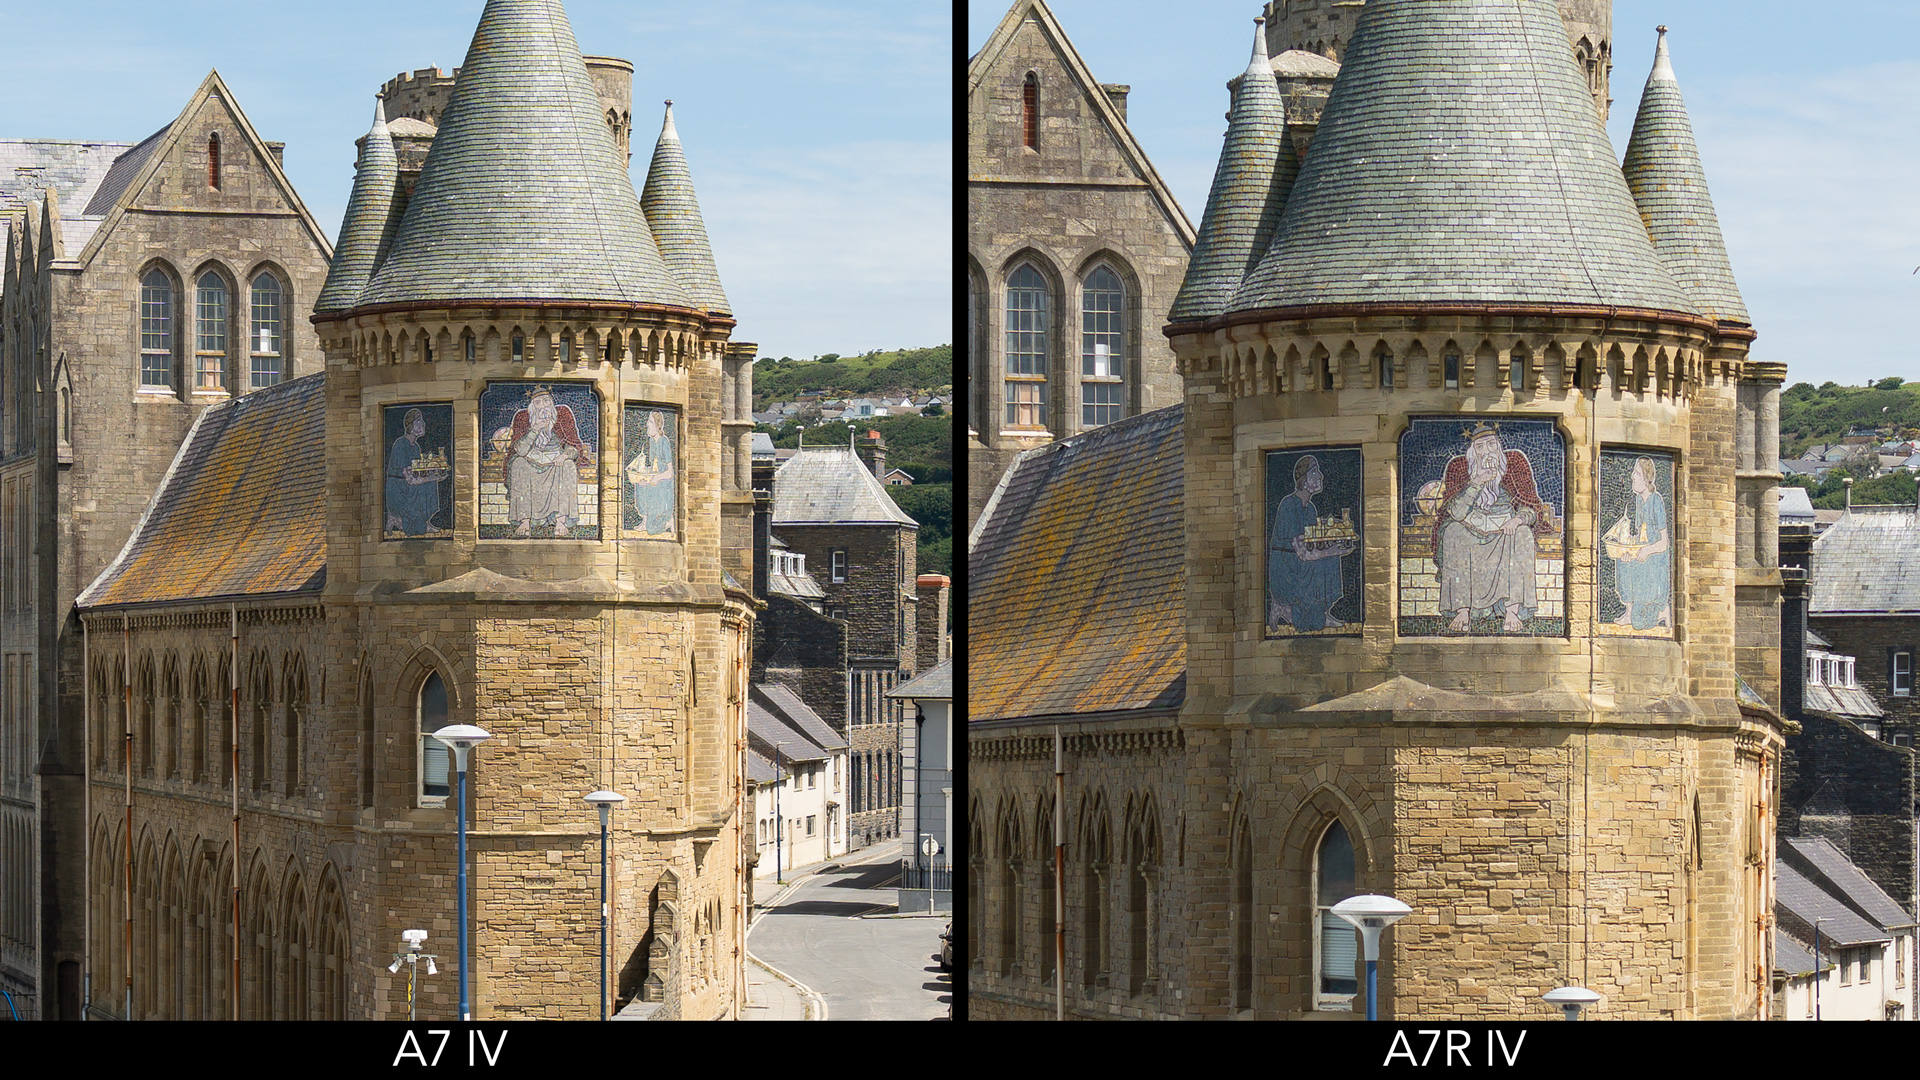 Crop of the previous photo, showing the different in details and resolution between the A7 IV and A7R IV